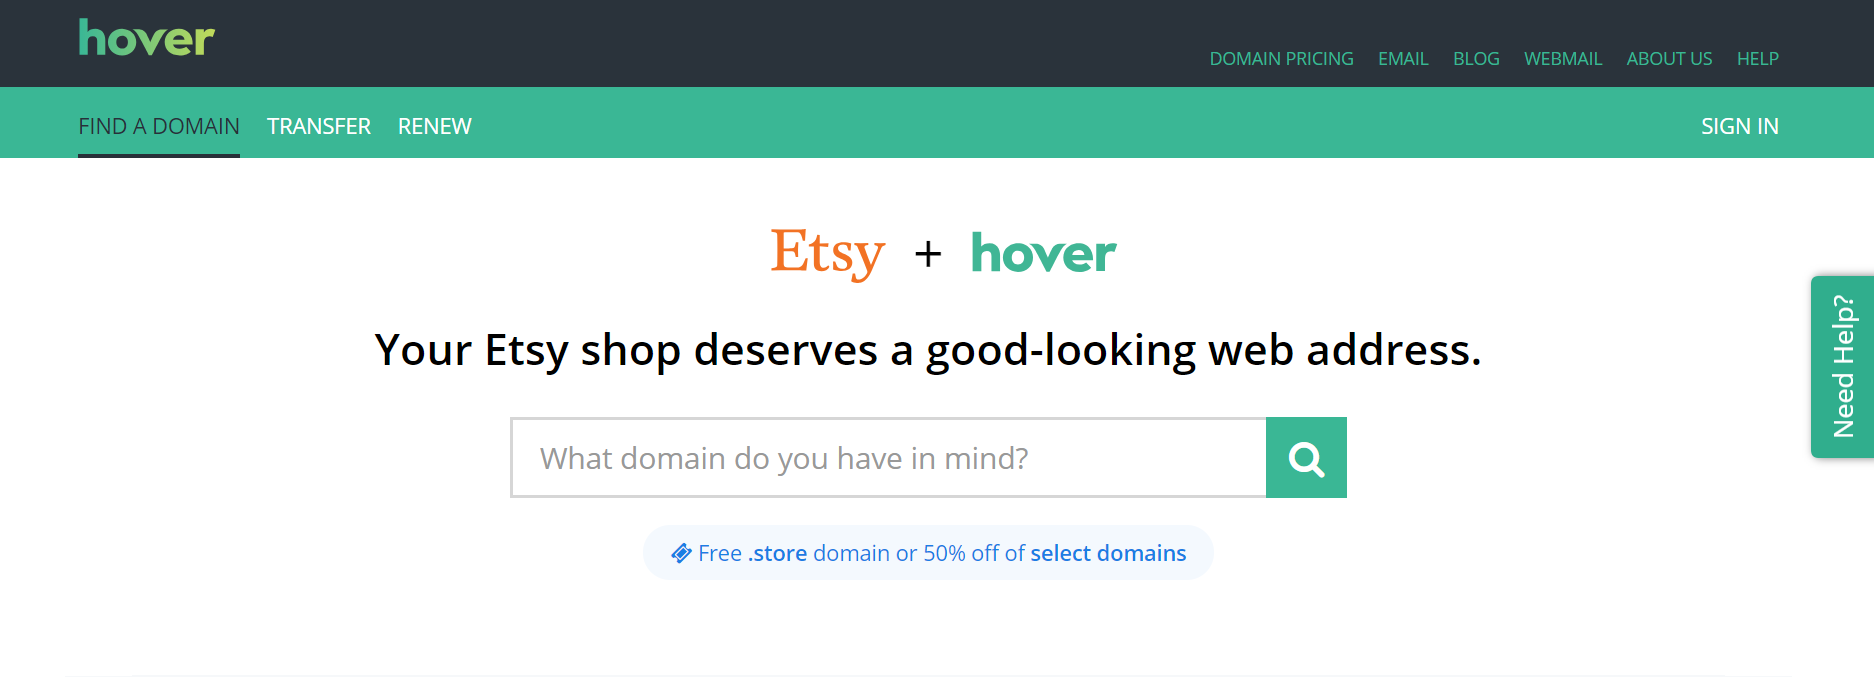 etsy_and_hover_landing_page.png